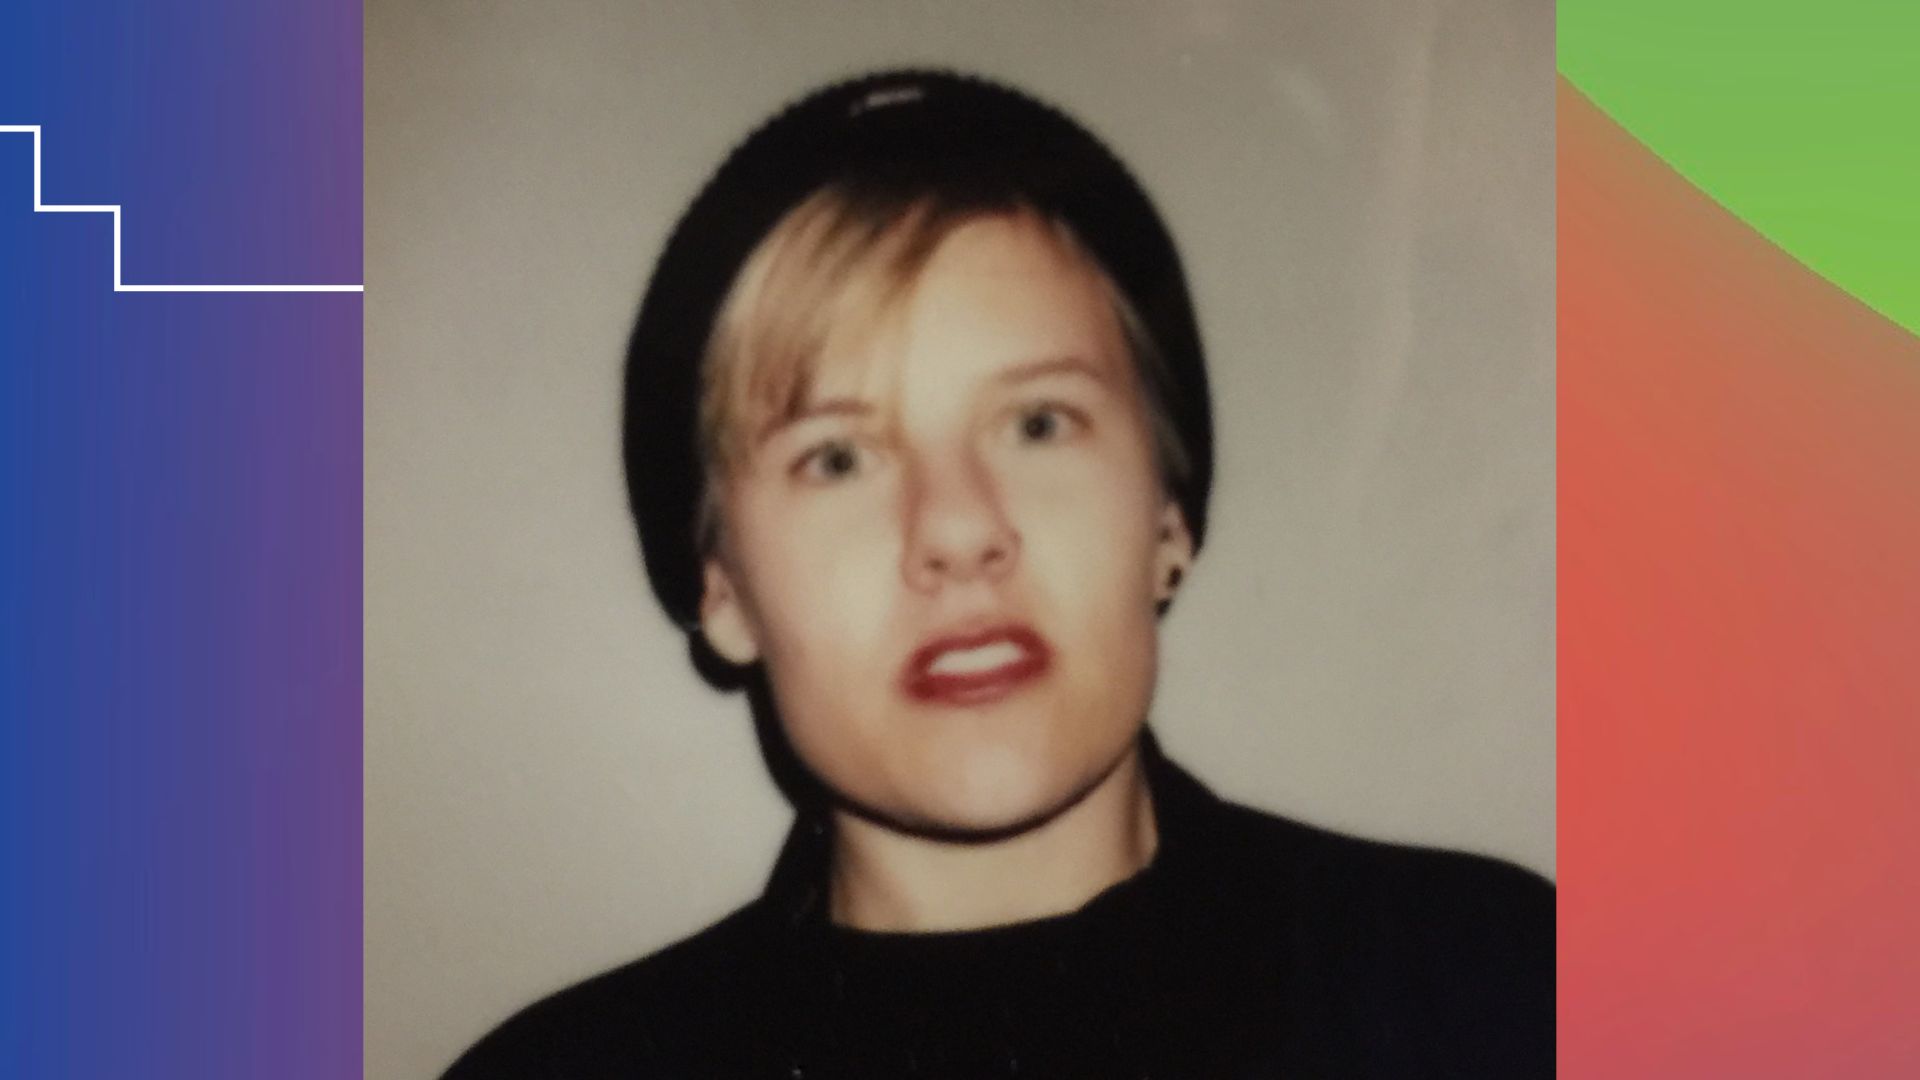 Maggie Hazen, a white queer person from Southern California. She has blonde hair and is wearing a black beanie hat and a black sweater. She is candidly looking into the camera with a curious gaze.